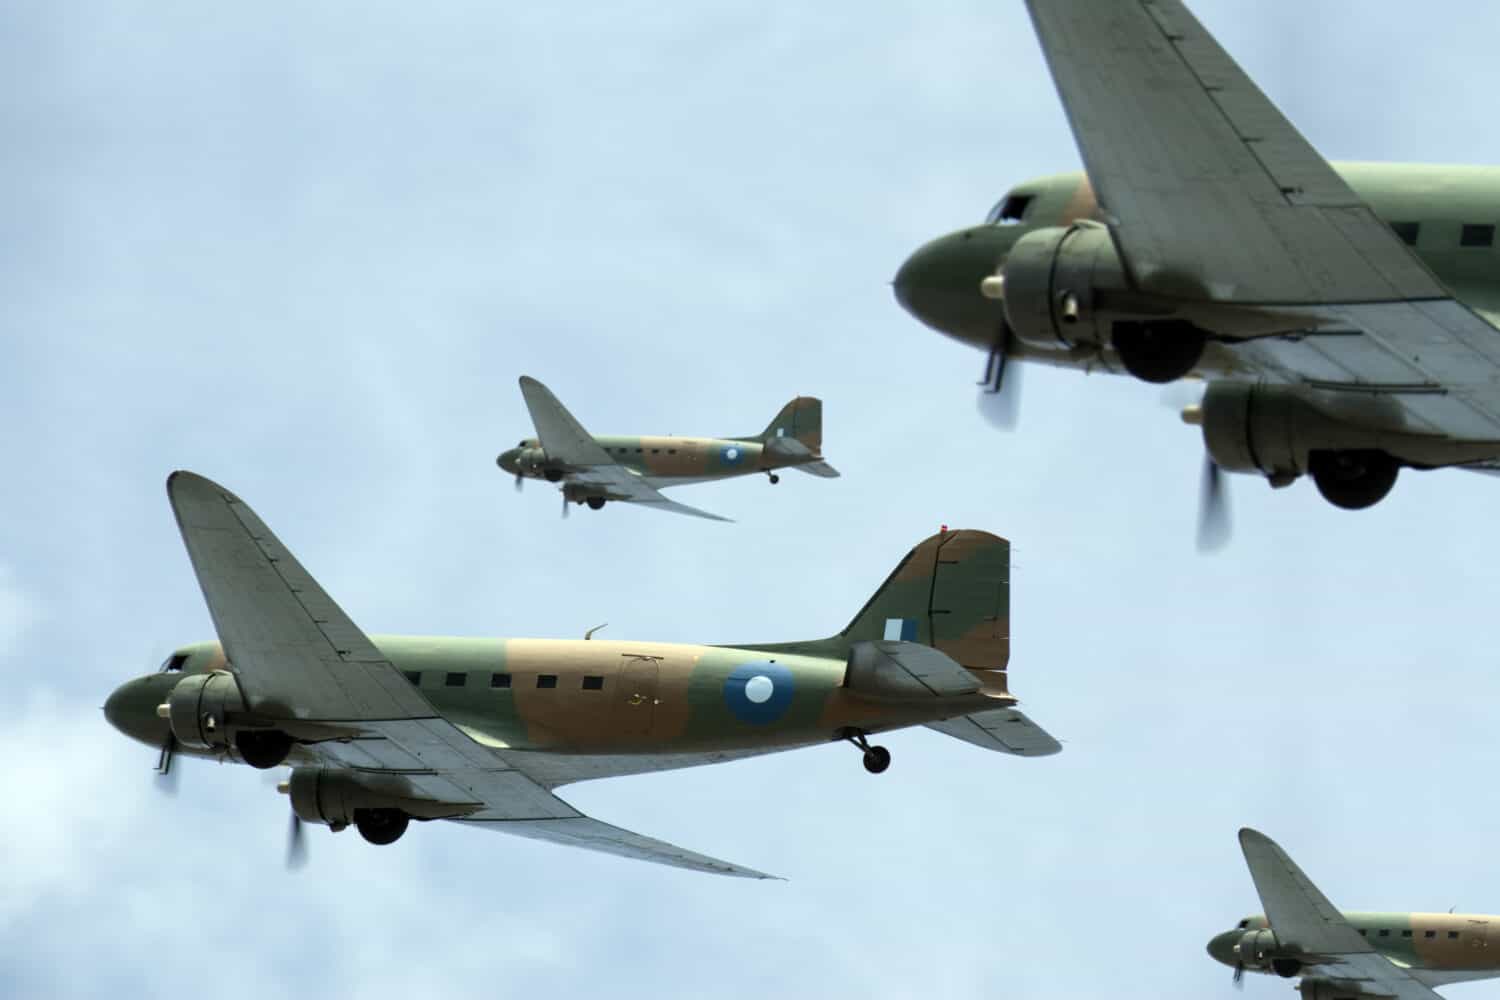 A flight of Dakota (Douglas C-47) transport planes banking to starboard. (Created with minimum depth of field. Focus is on the second aircraft from the front.)